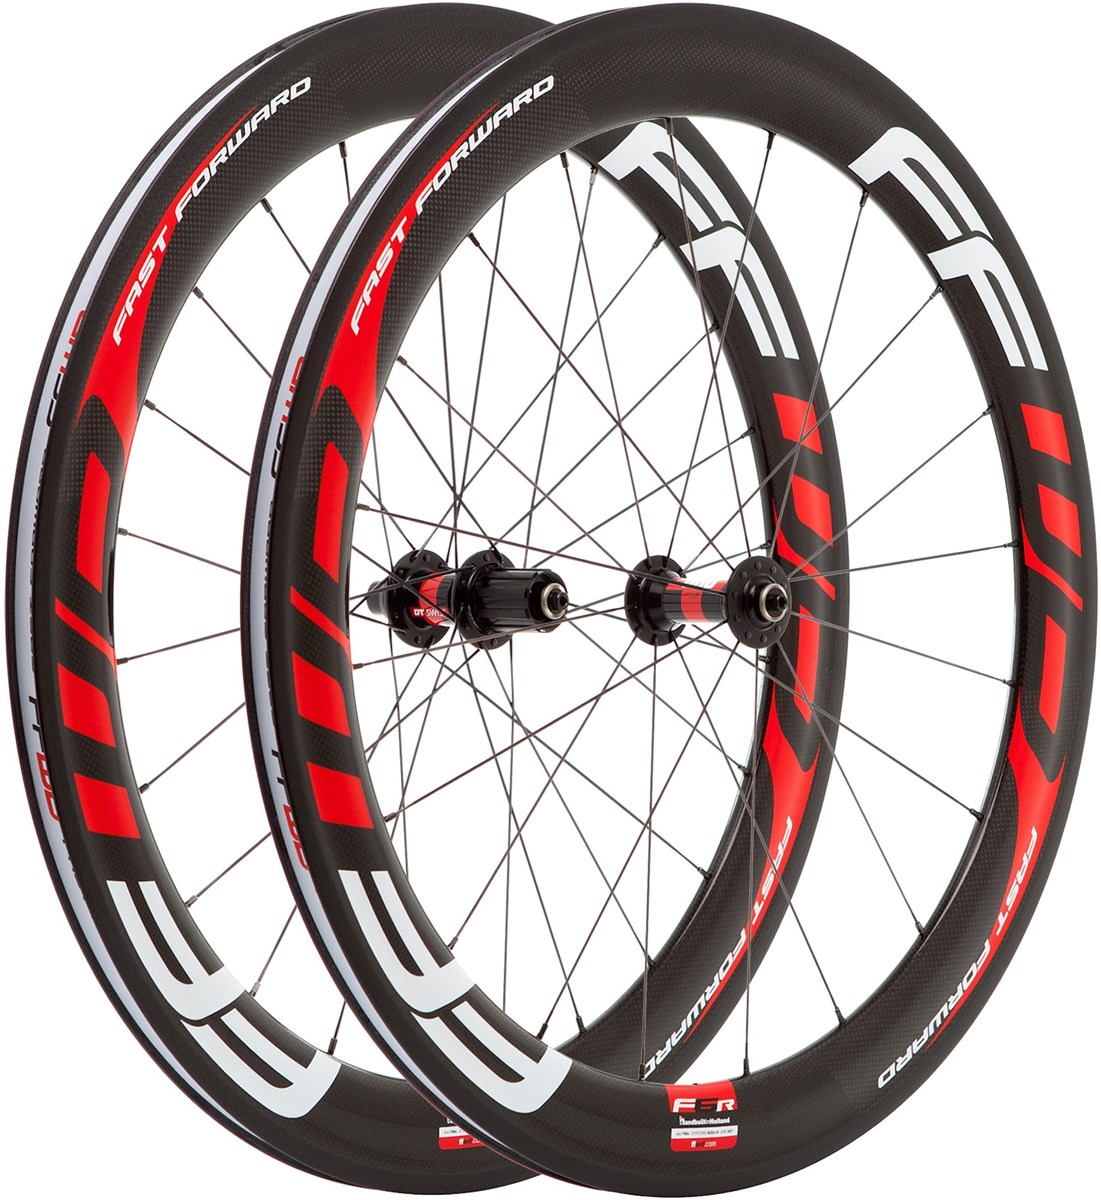 Fast Forward F6R Full Carbon Clincher DT240 Wheelset product image